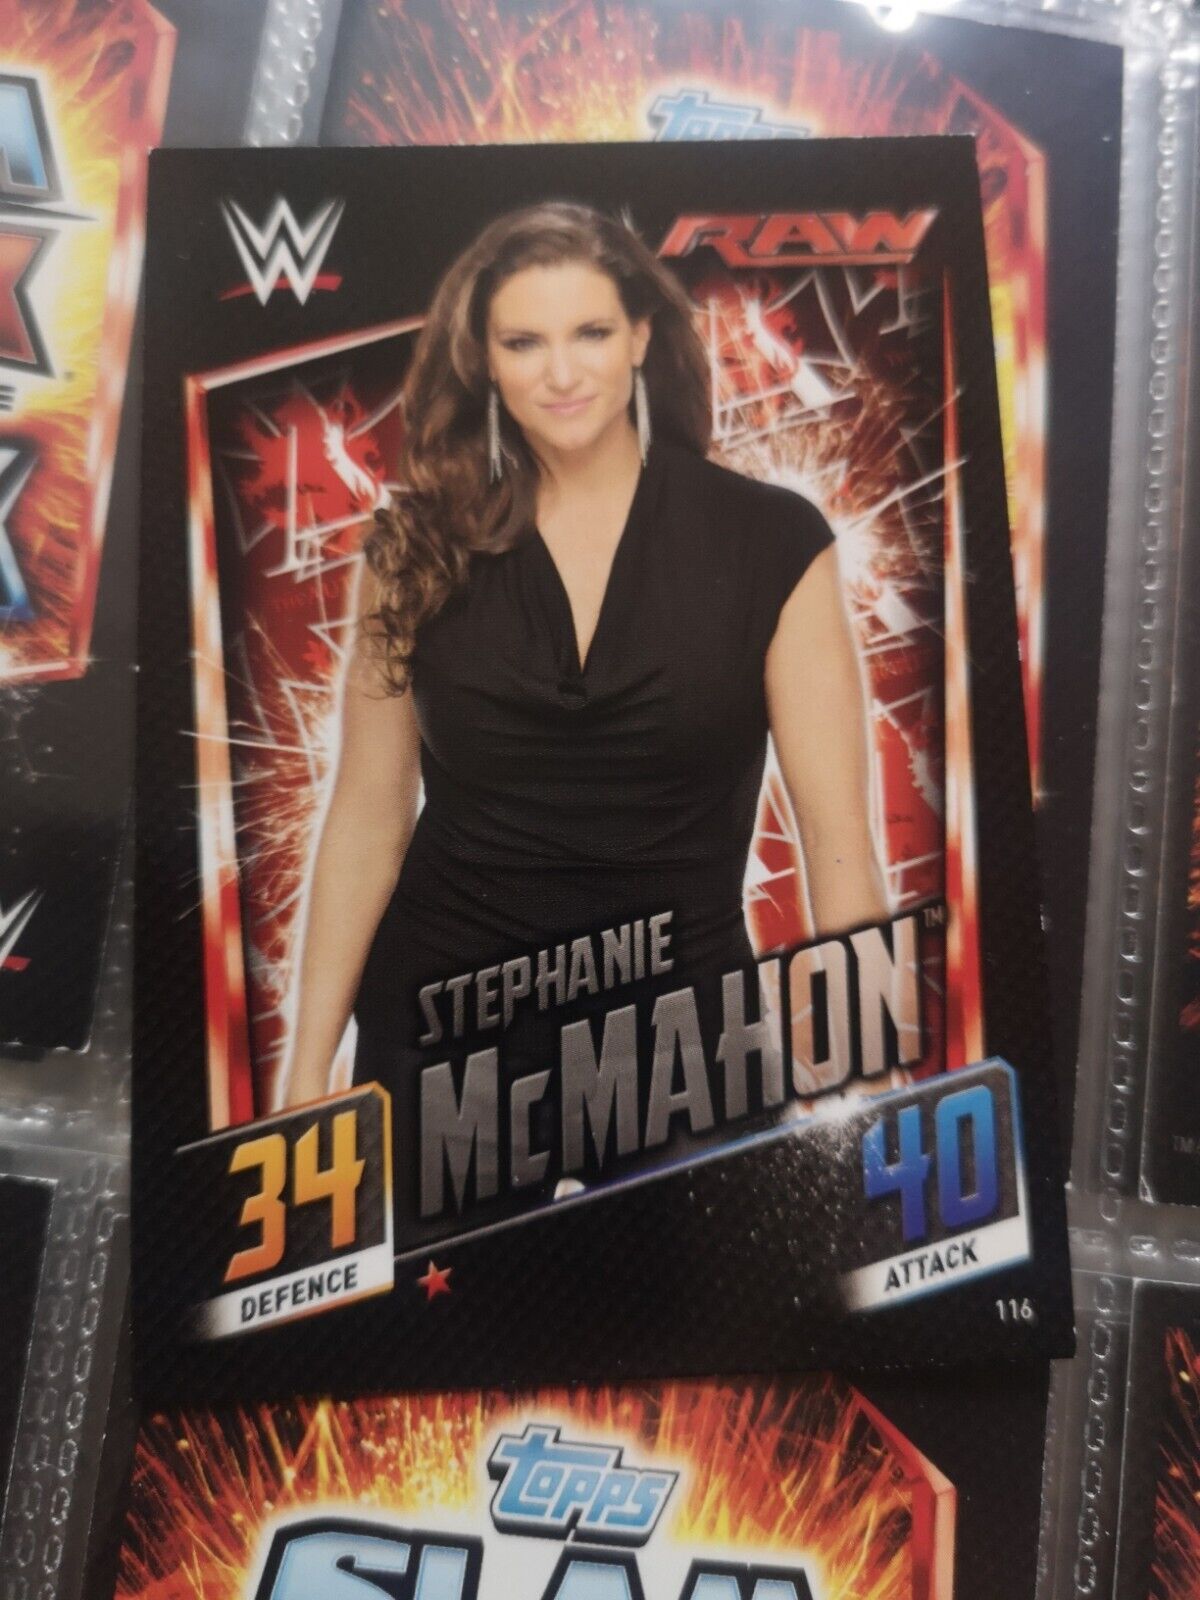 2015 Attax Topps #116 Stephanie Mcmahon Catch Slam Collection Card